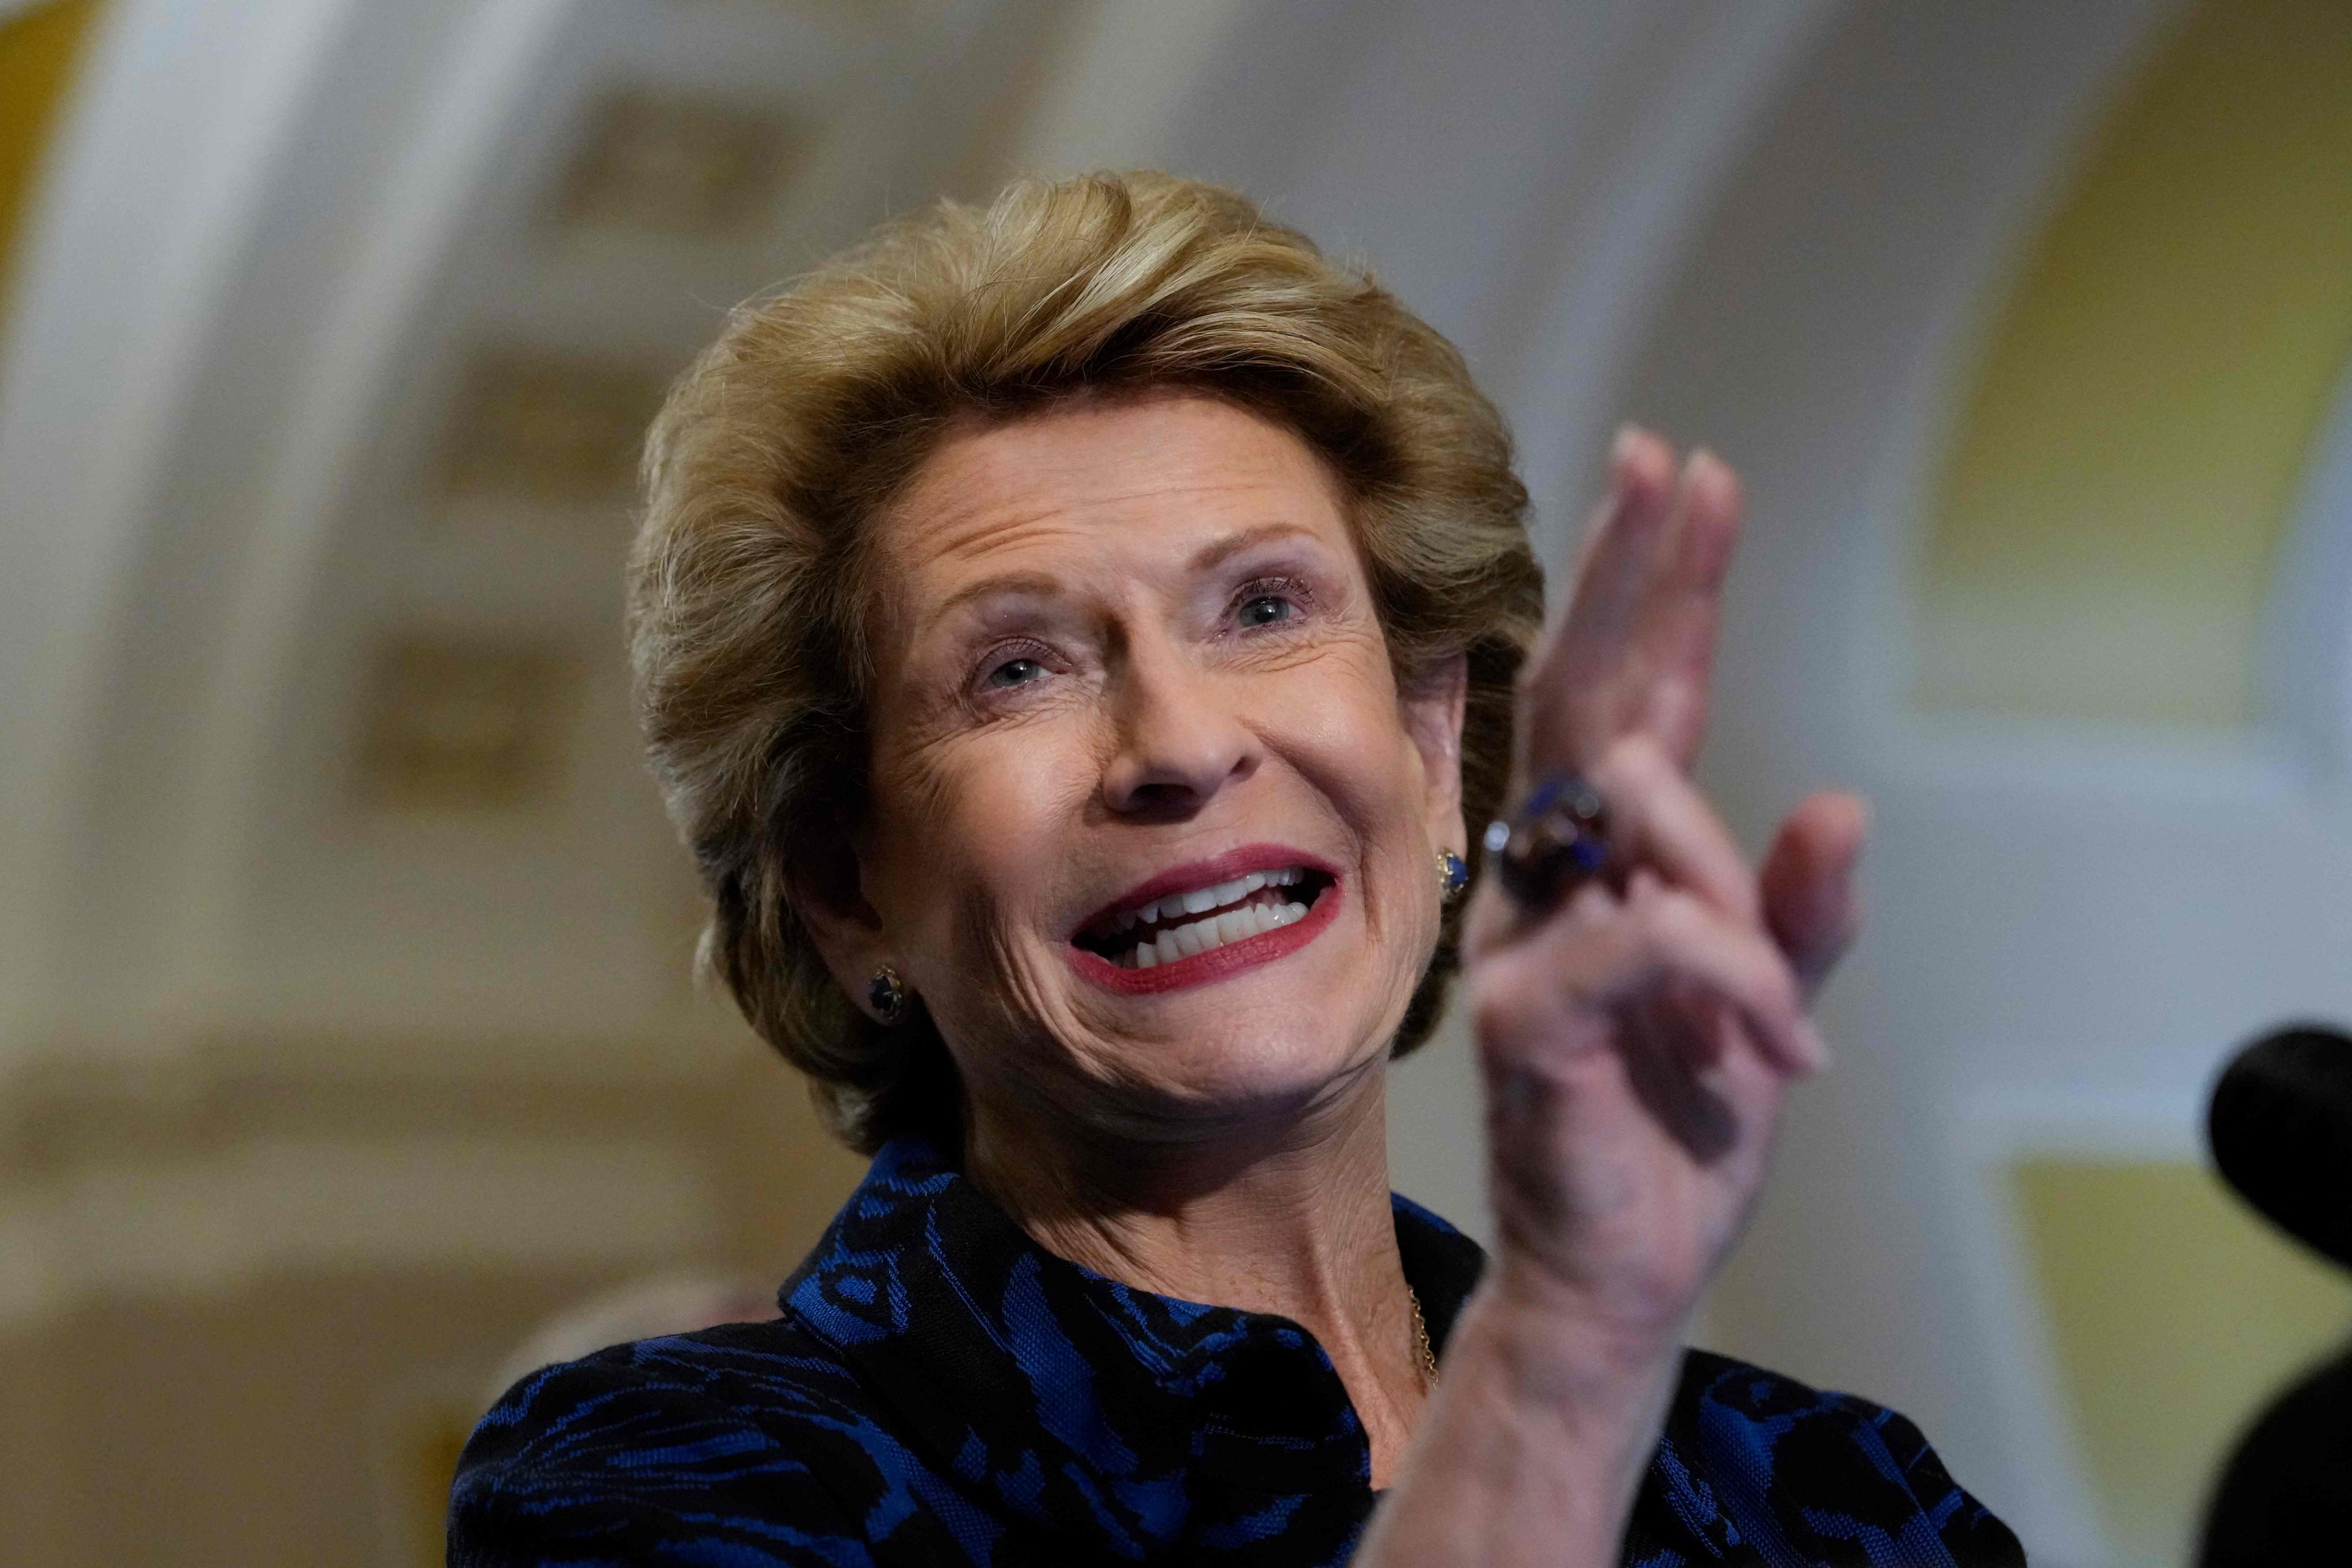 US Democratic senator Debbie Stabenow of Michigan chairs the Senate Agriculture Committee that convened Wednesday’s hearing. Photo: Getty Images via AFP